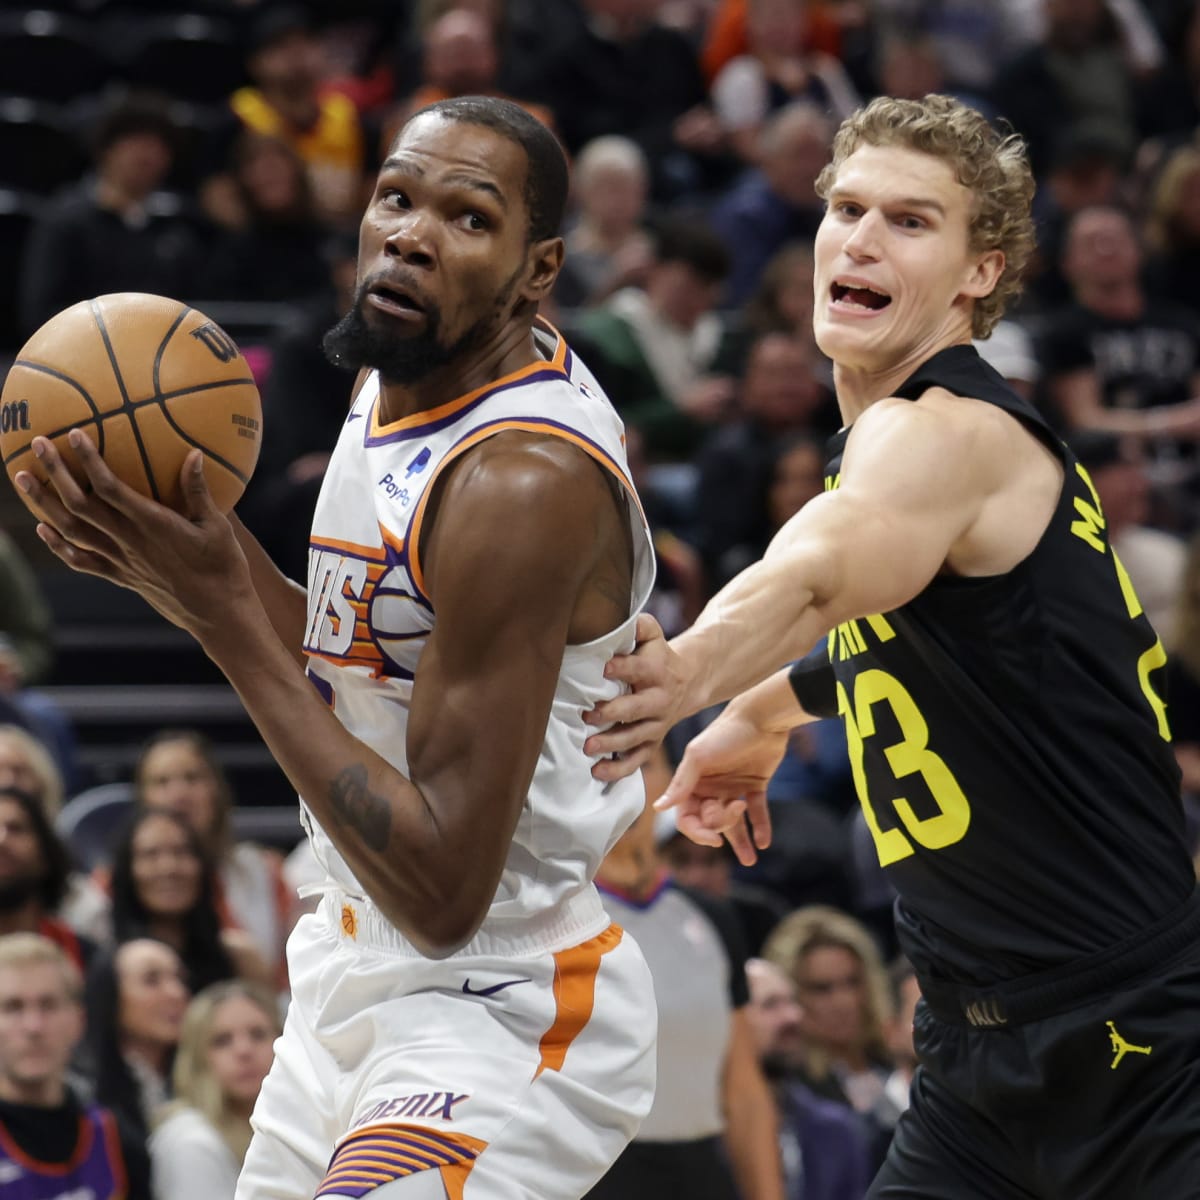 Who wins the Lauri Markkanen vs. Kevin Durant matchup in tonight's game?